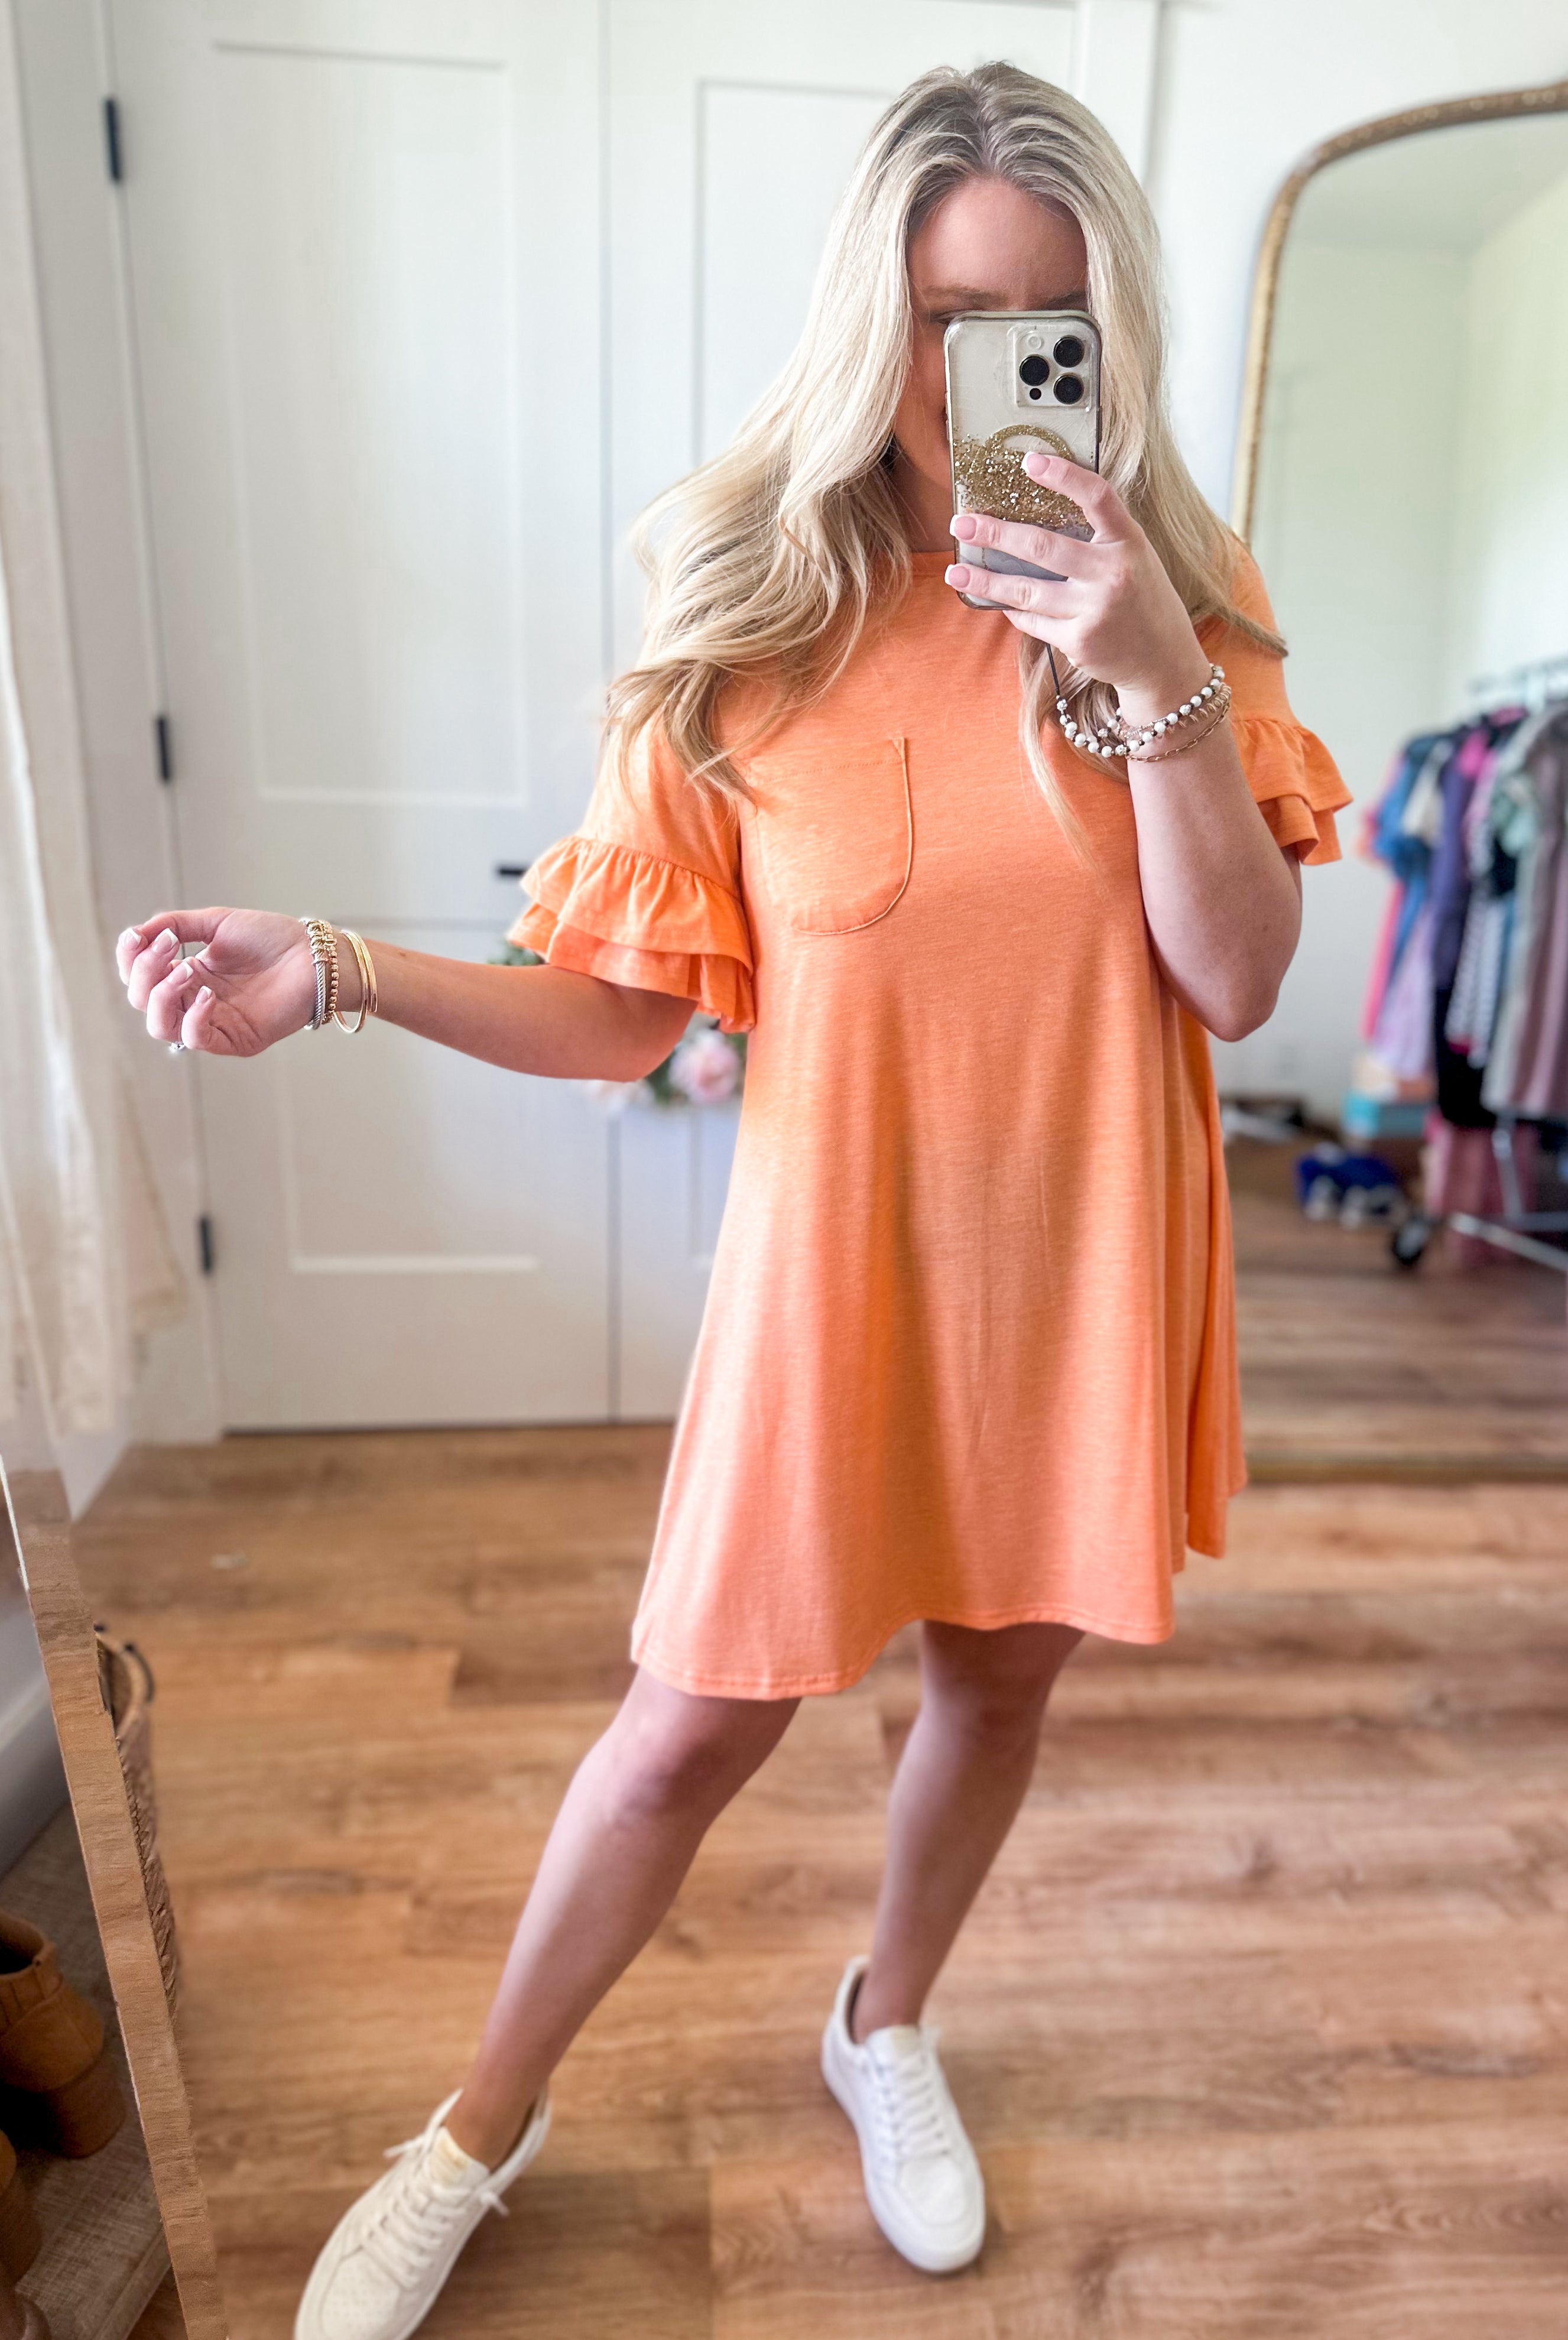 Melvis French Terry Ruffle Pocket Tee Shirt Dress - Be You Boutique